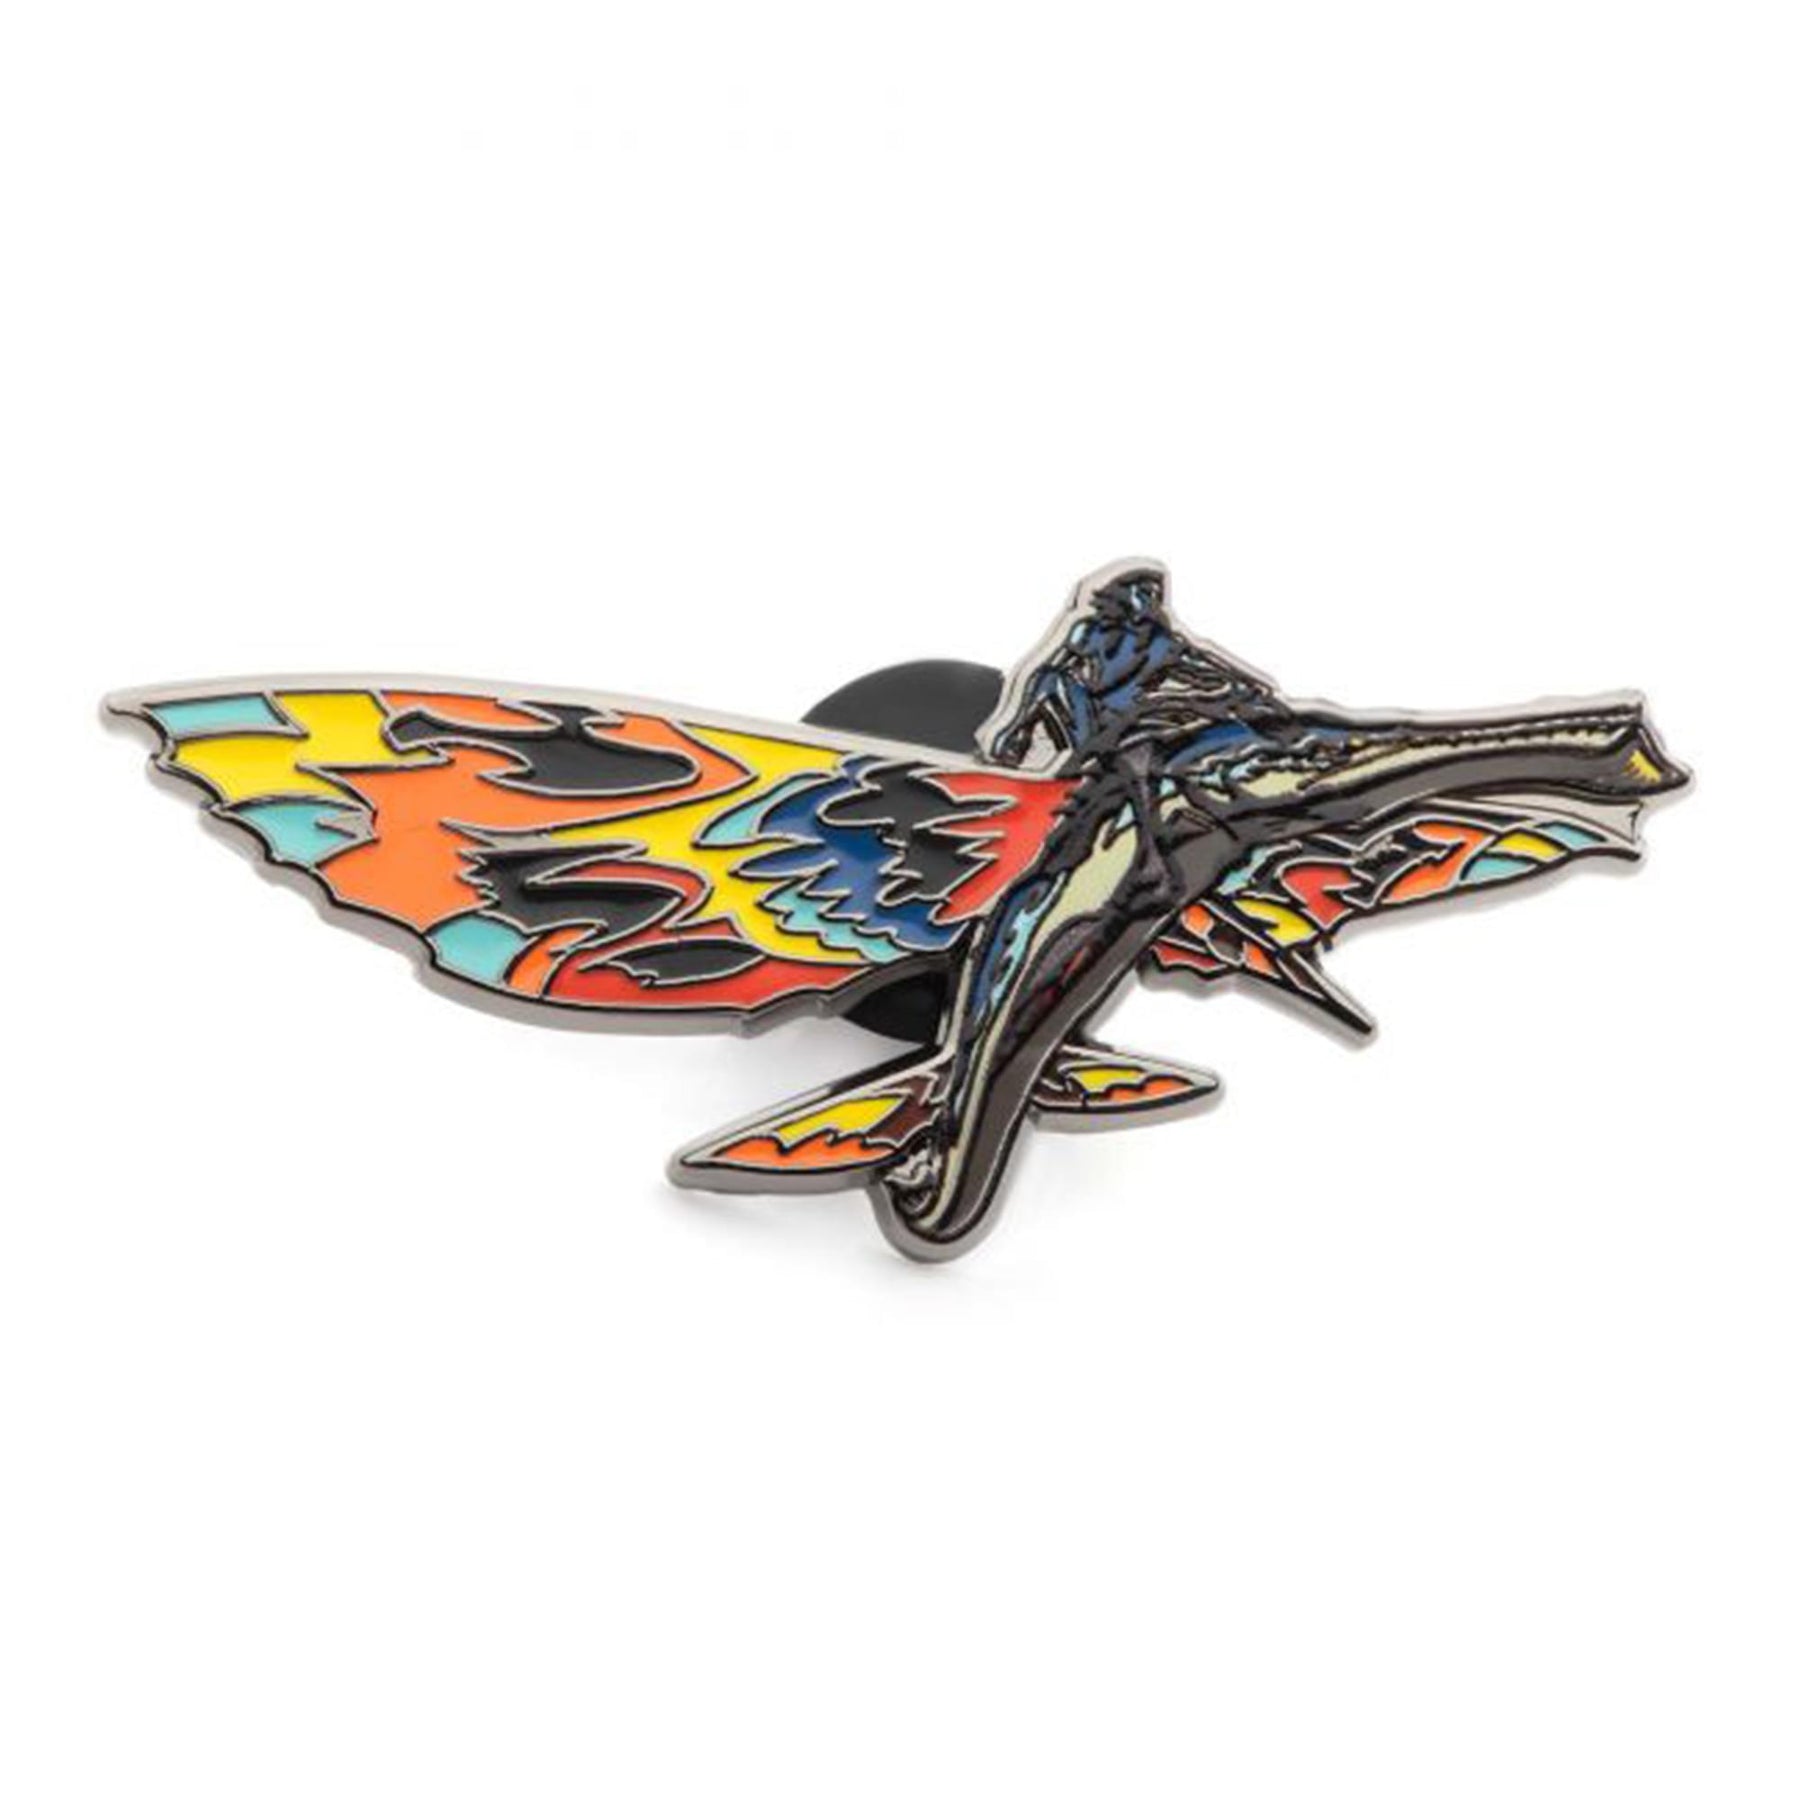 Avatar 2: The Way of Water Skimwing and Rider Enamel Pin